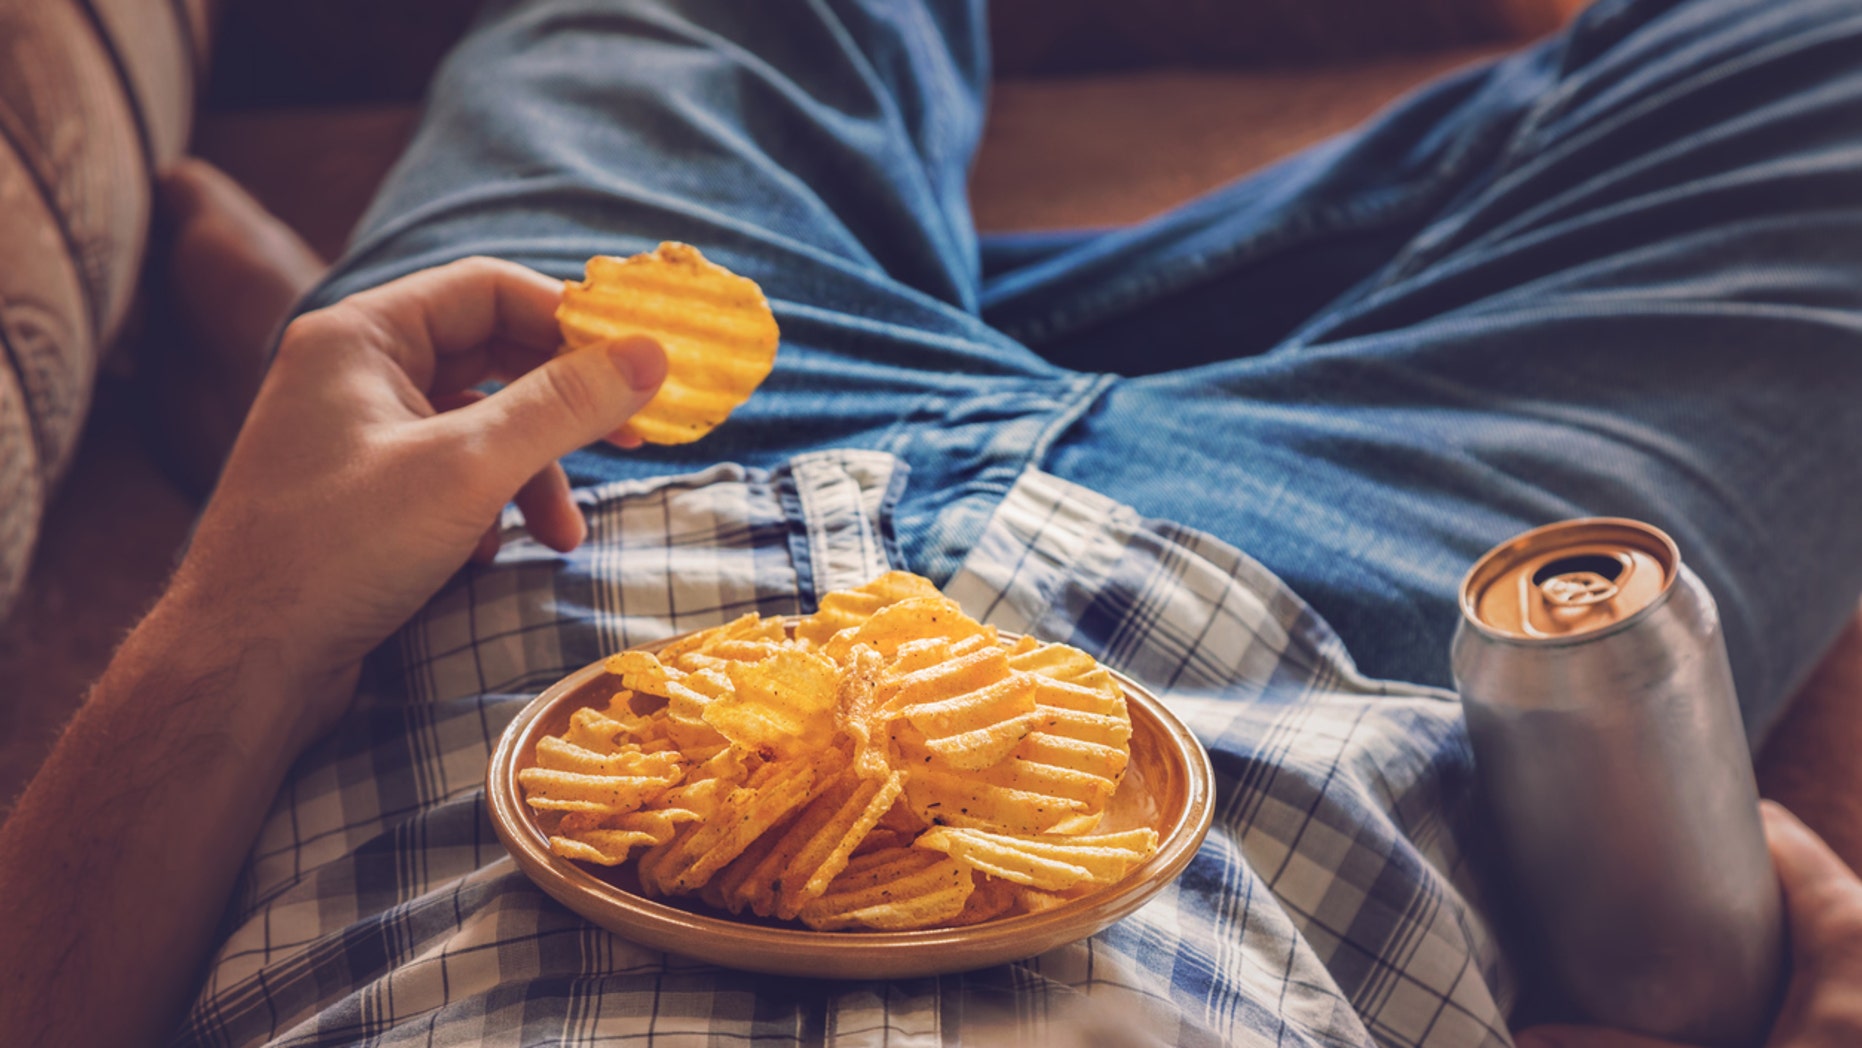 A team led by Professor Herbert Herzog, head of the Laboratory of Food Disorders at the Garvan Medical Research Institute, discovered that when we are stressed, eating more at ease can lead to even greater weight gain.